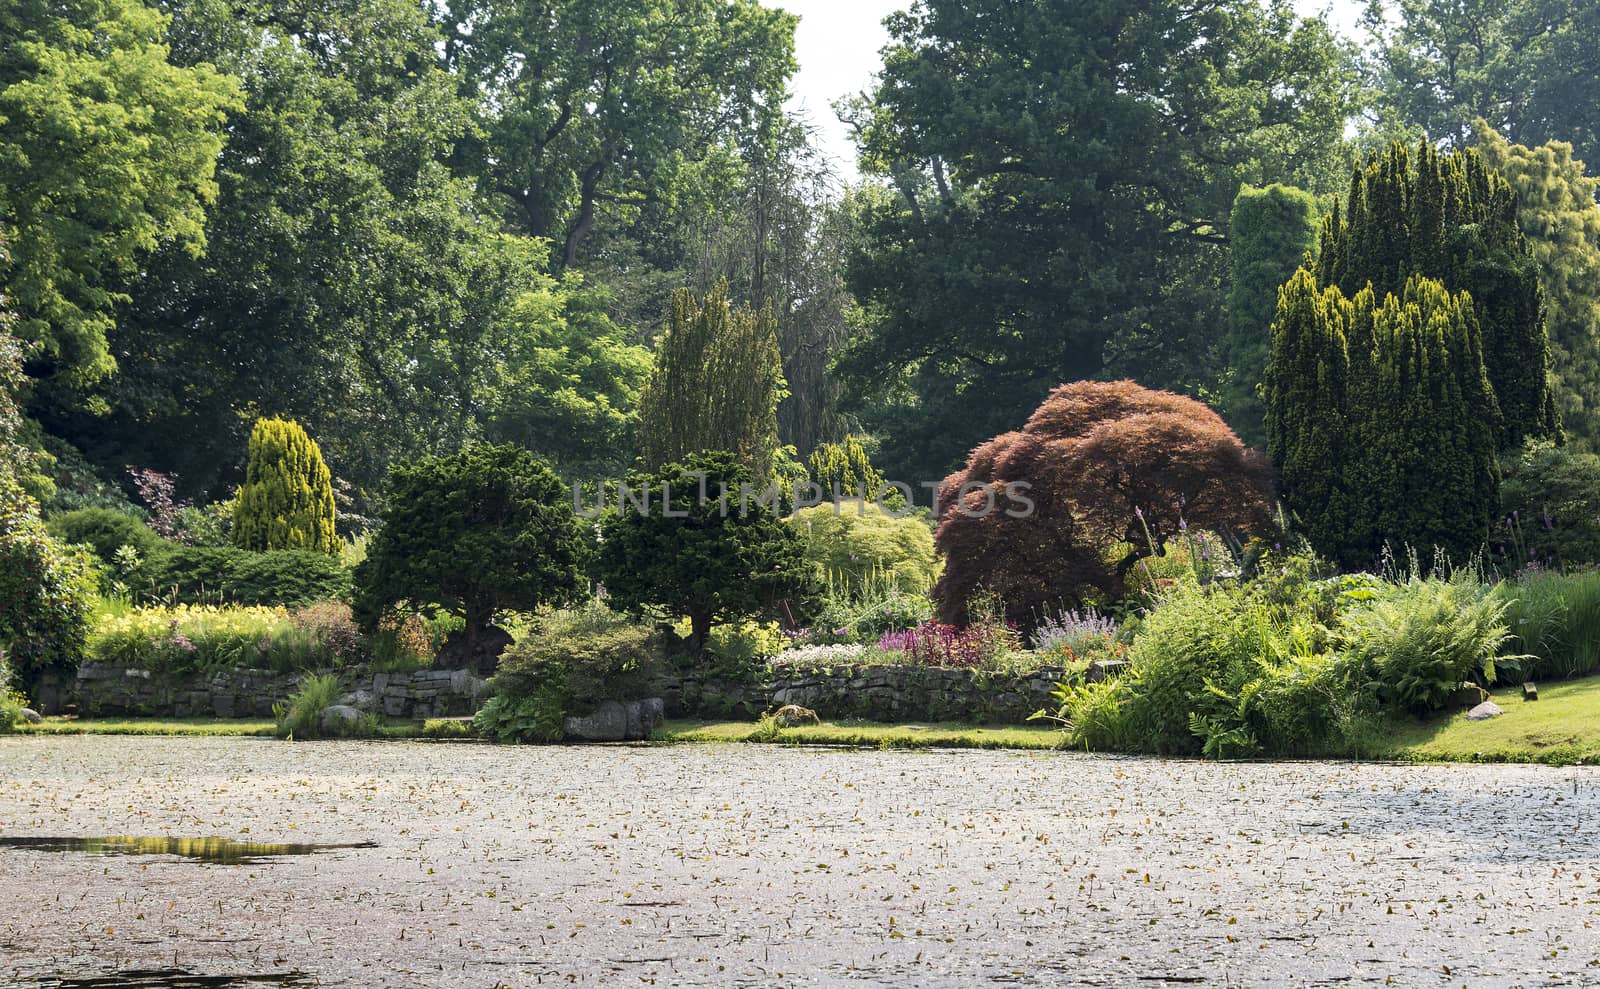 big green garden with water pond and decorated plants and trees